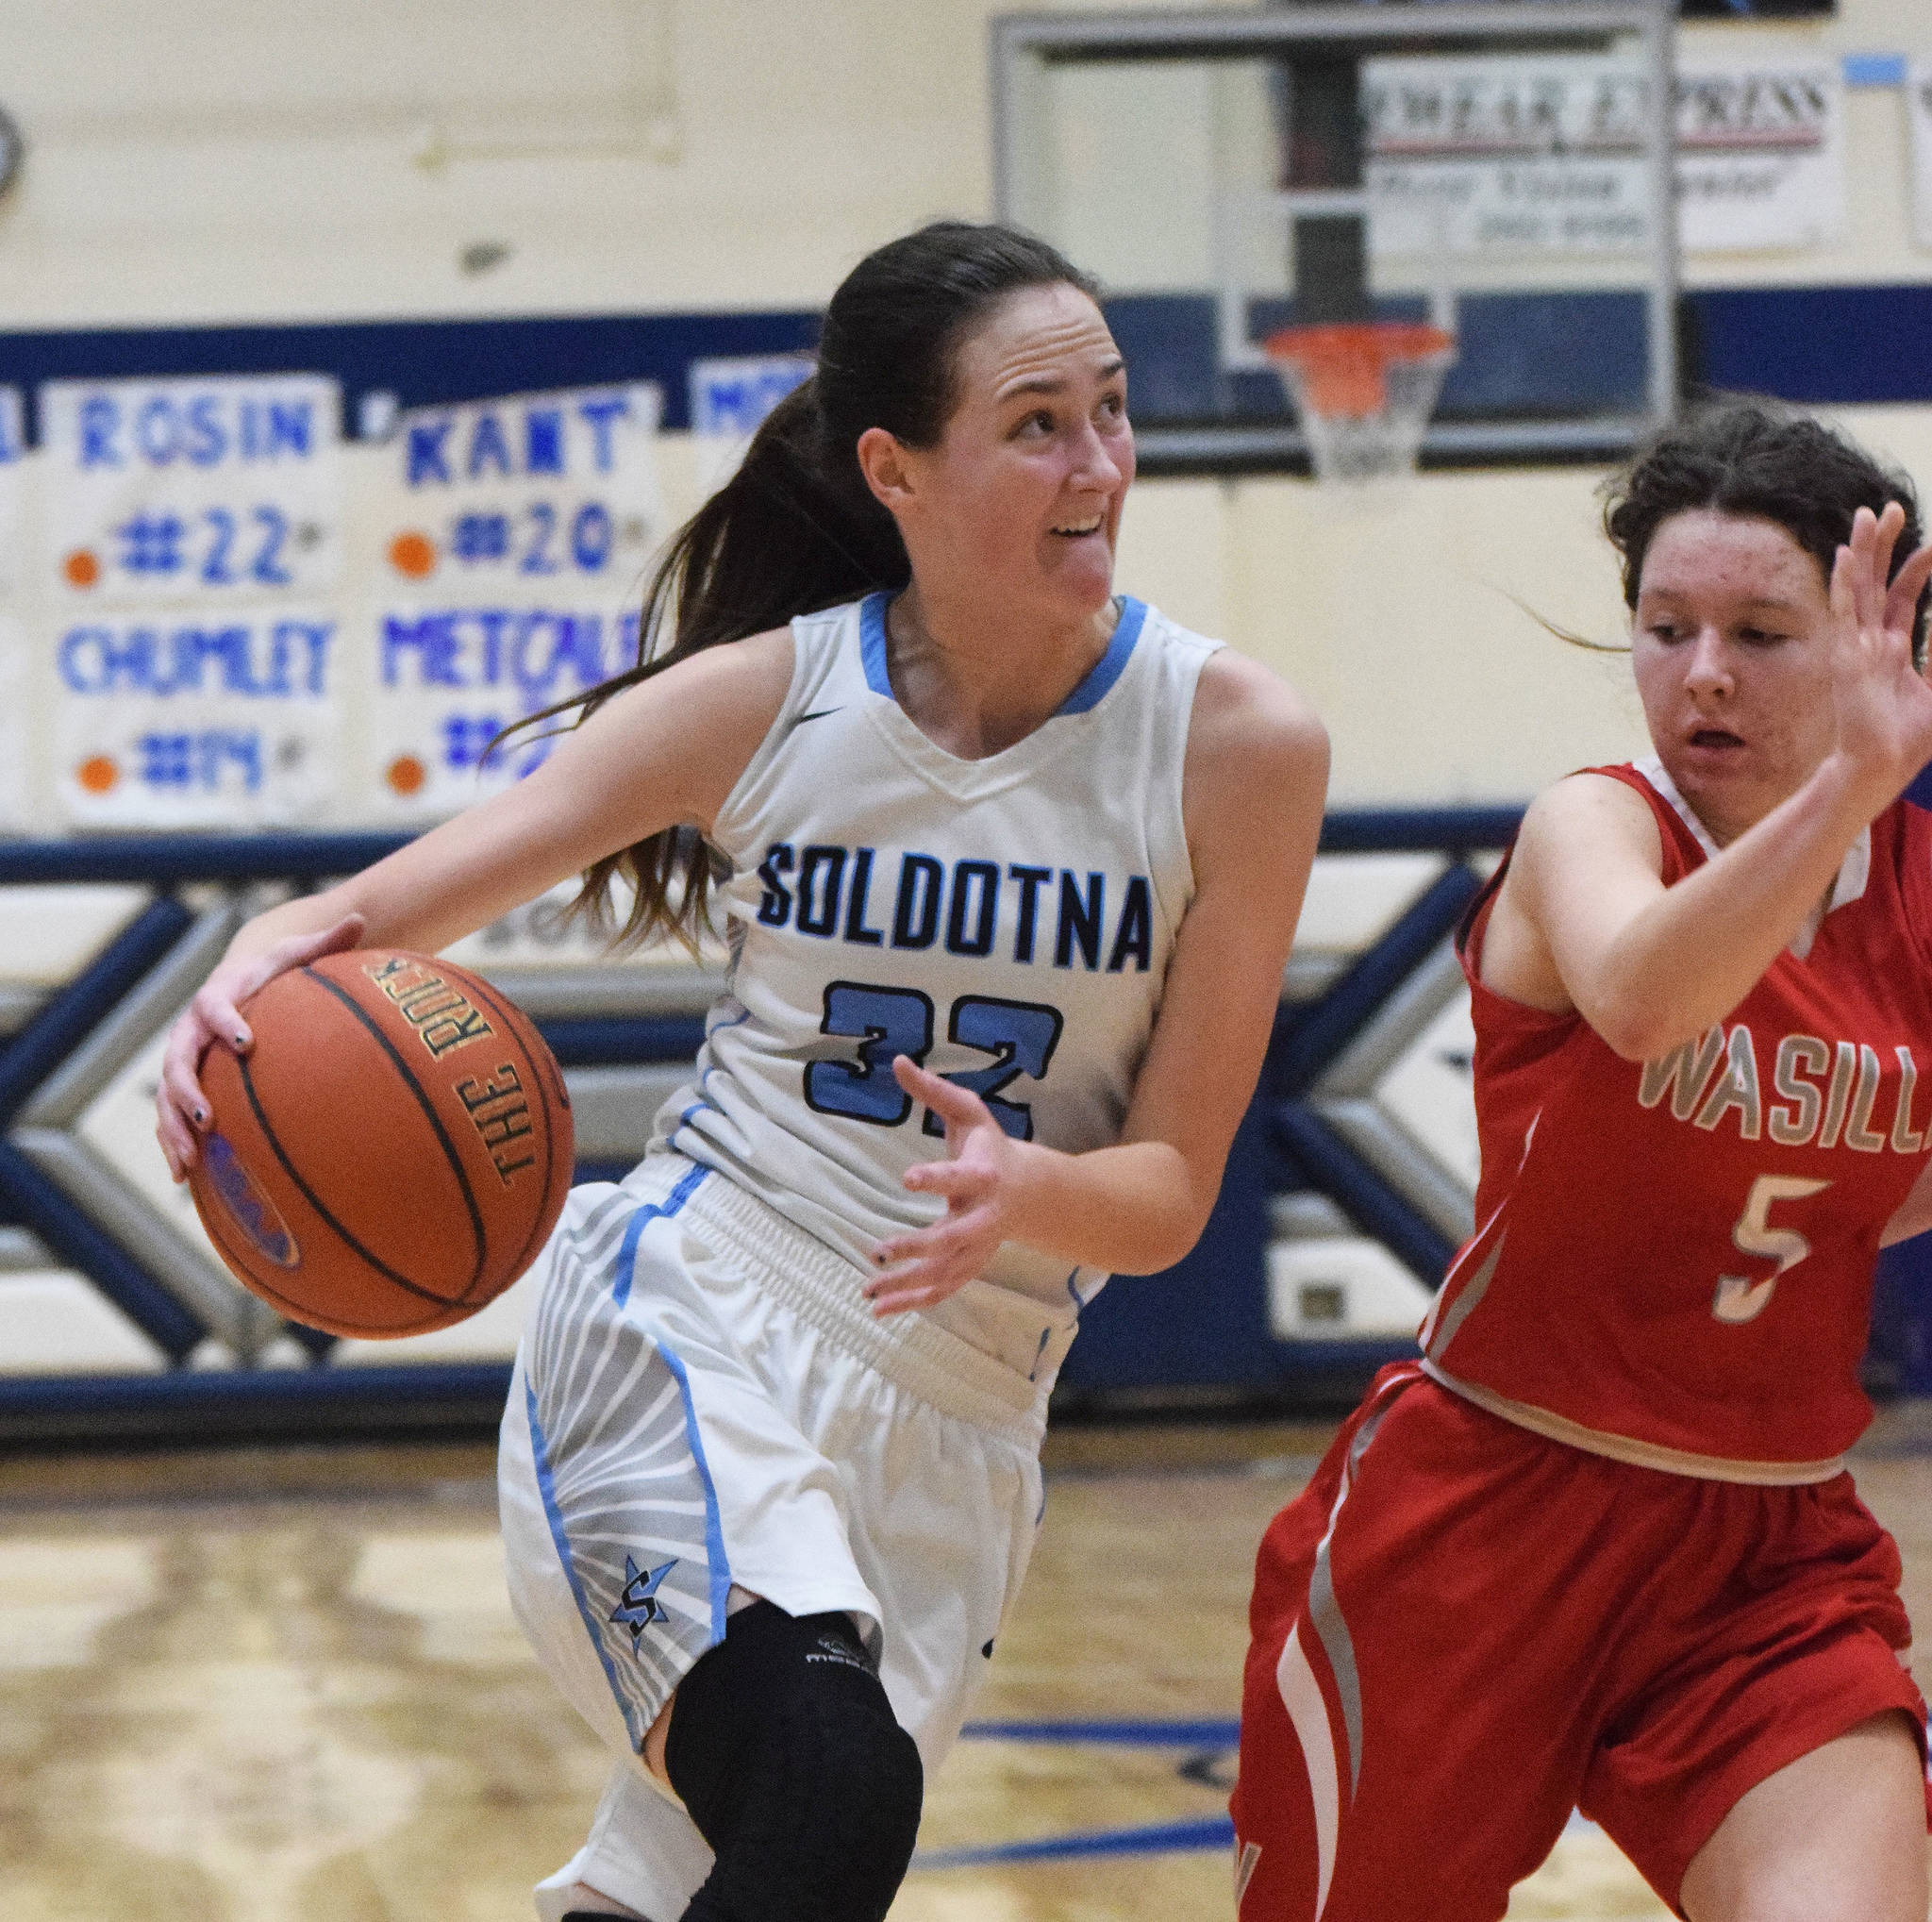 Soldotna’s Danica Schmidt drives against Wasilla’s Harmony McSorley (right) Friday night in a conference meeting at Soldotna High School. (Photo by Joey Klecka/Peninsula Clarion)